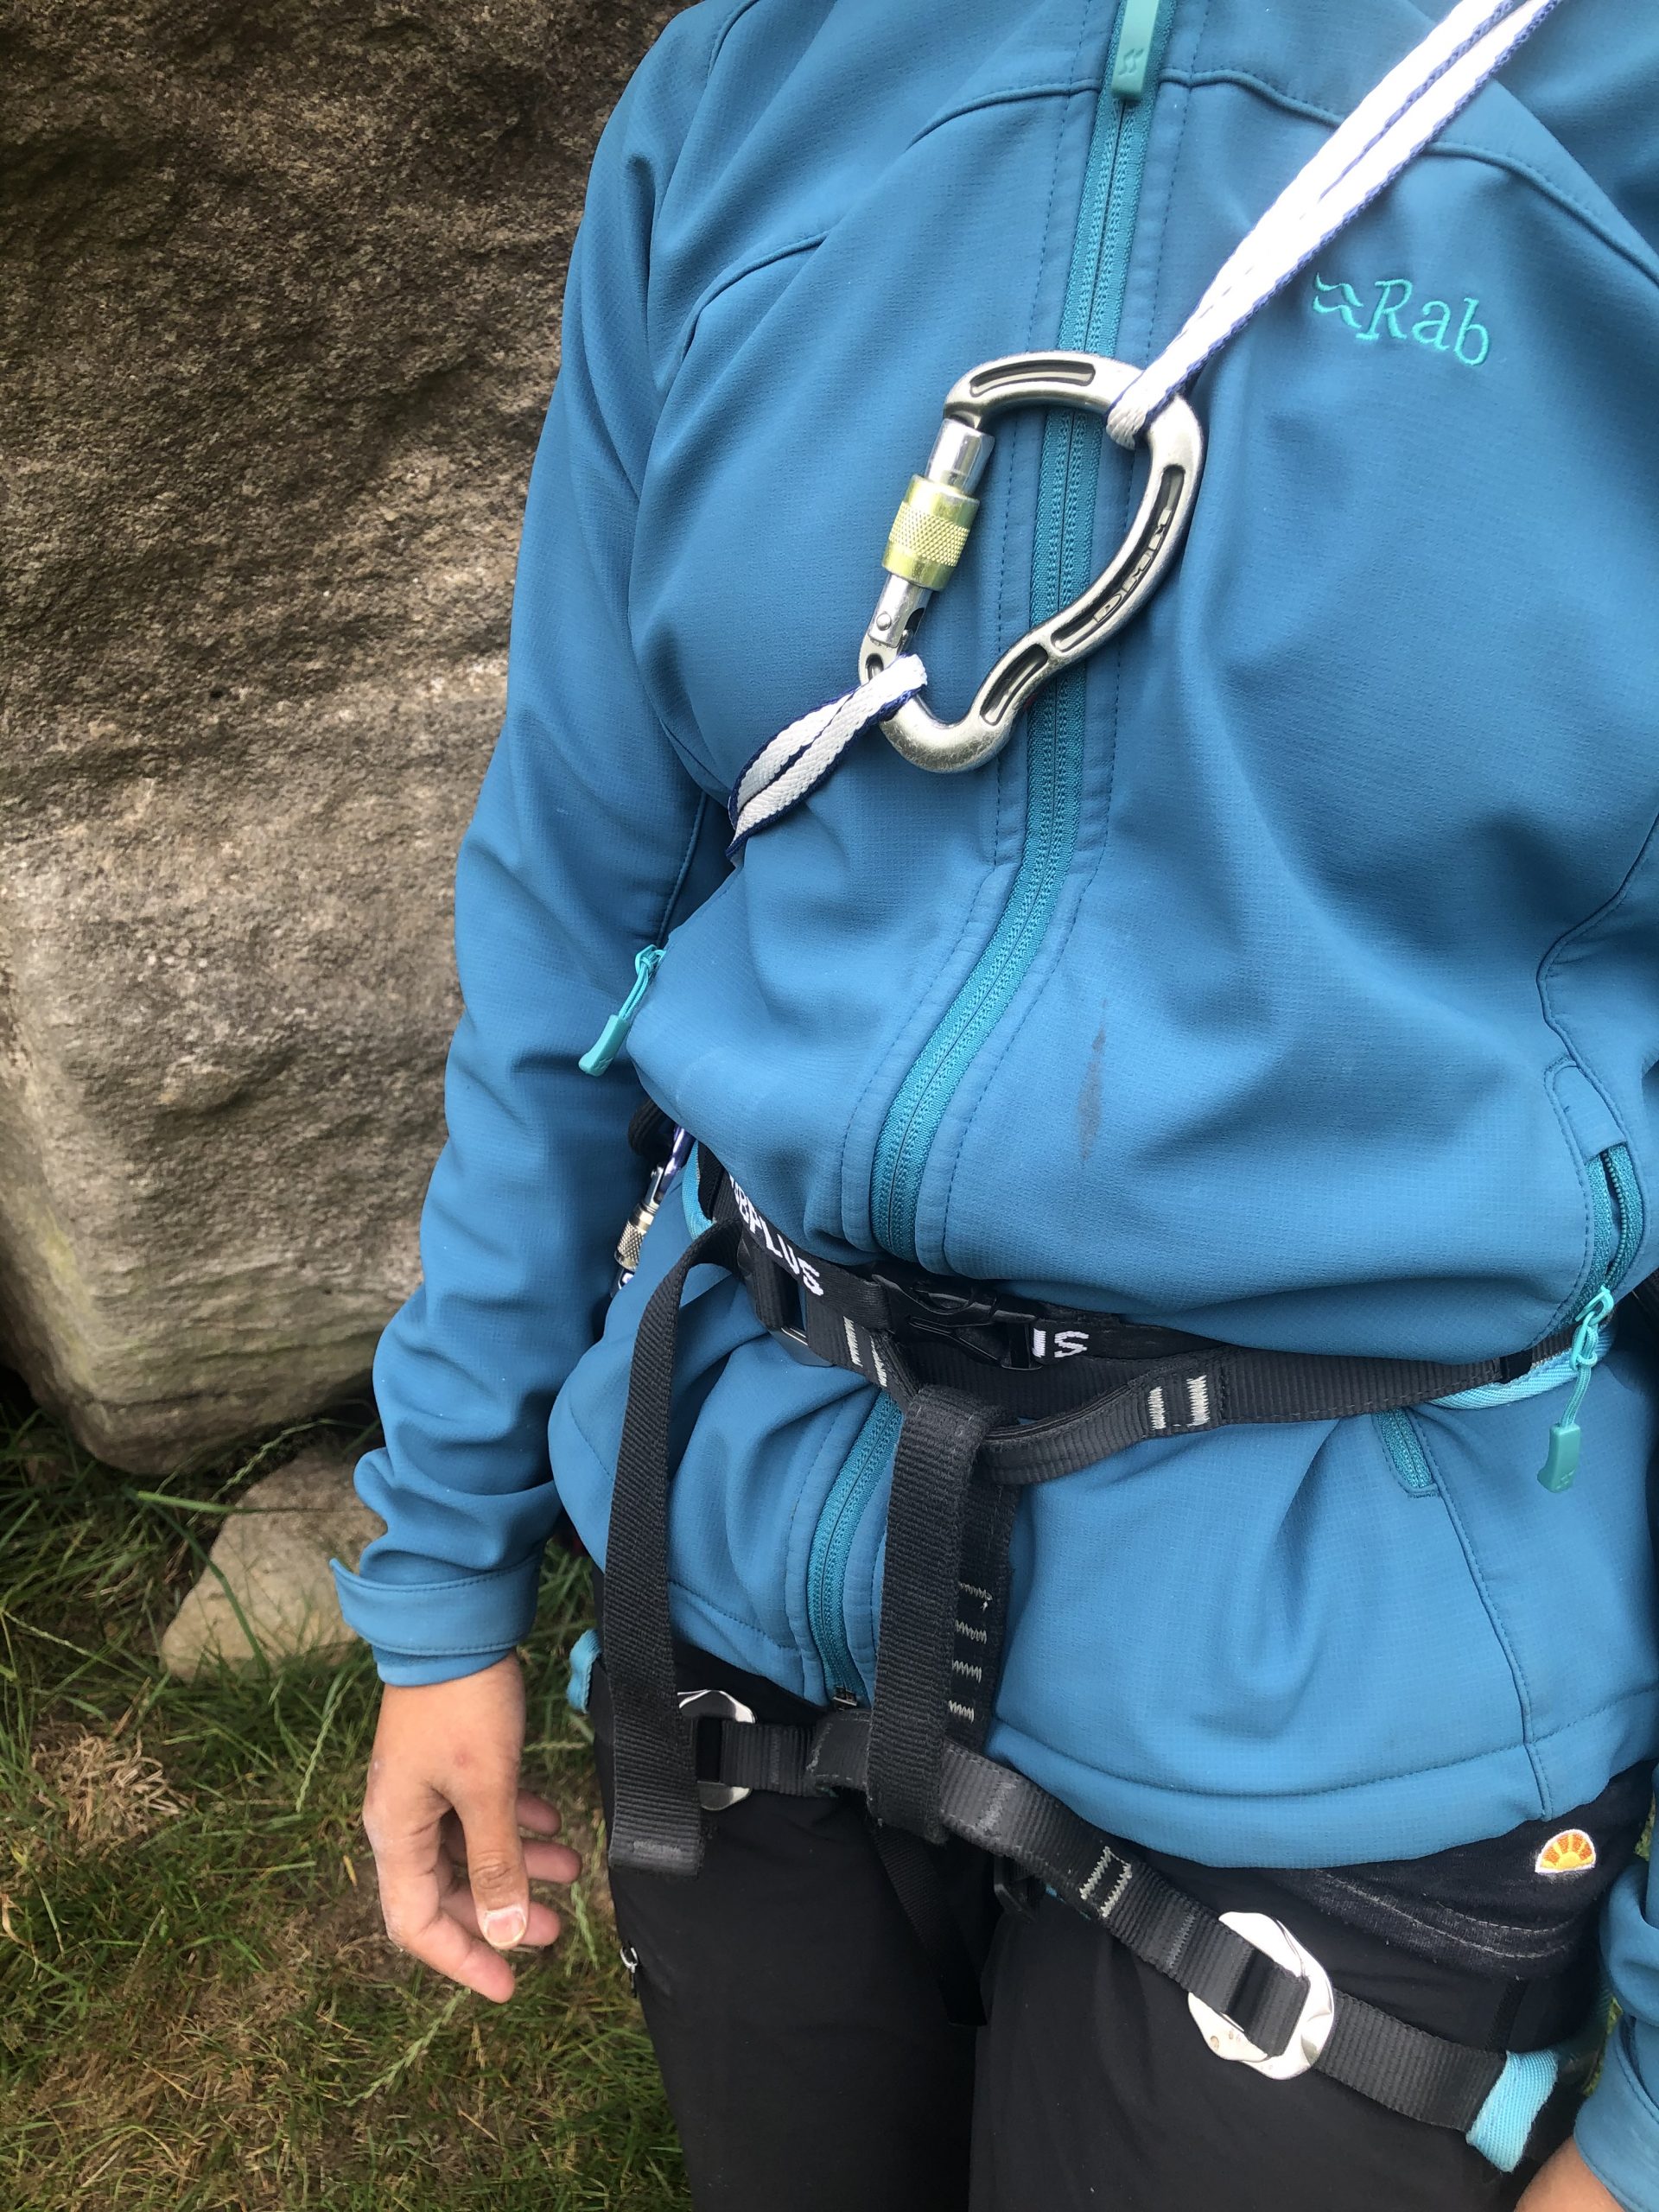 A close up showing an effective way of carrying a climbing sling while climbing - it is run around the neck and underneath one armpit and clipped together with a karabiner ” width=